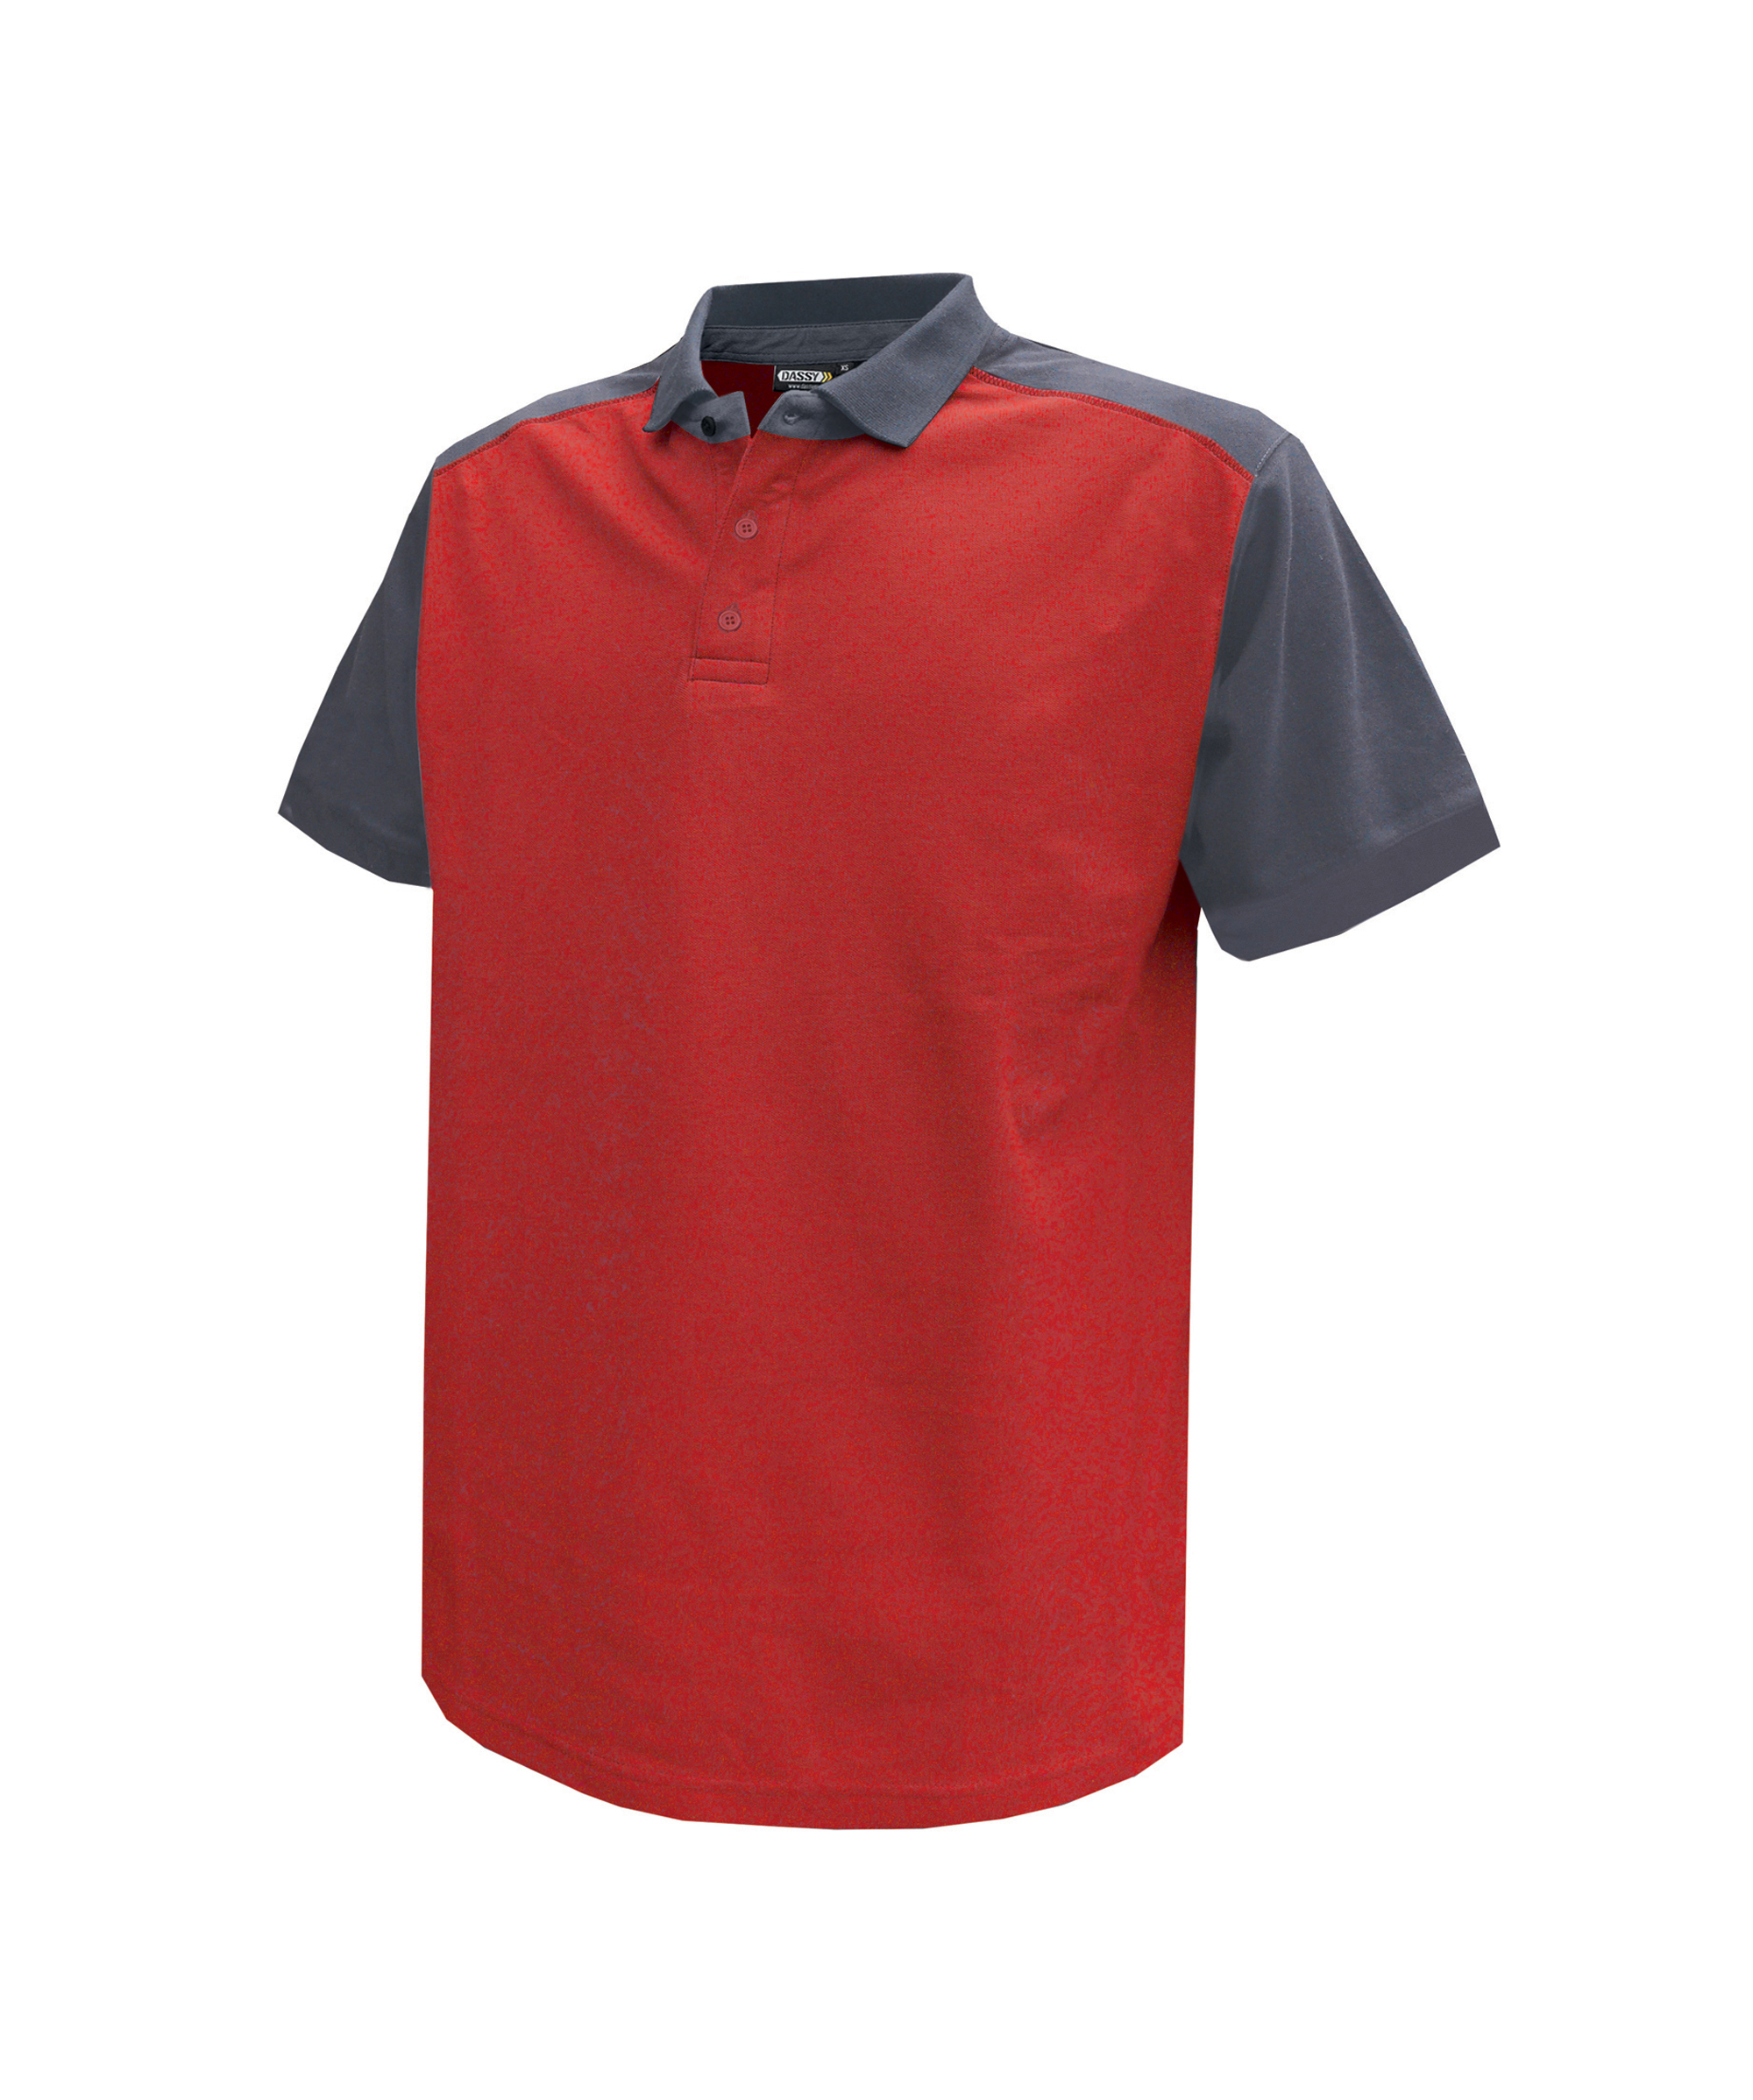 cesar_two-tone-polo-shirt_red-cement-grey_front.jpg